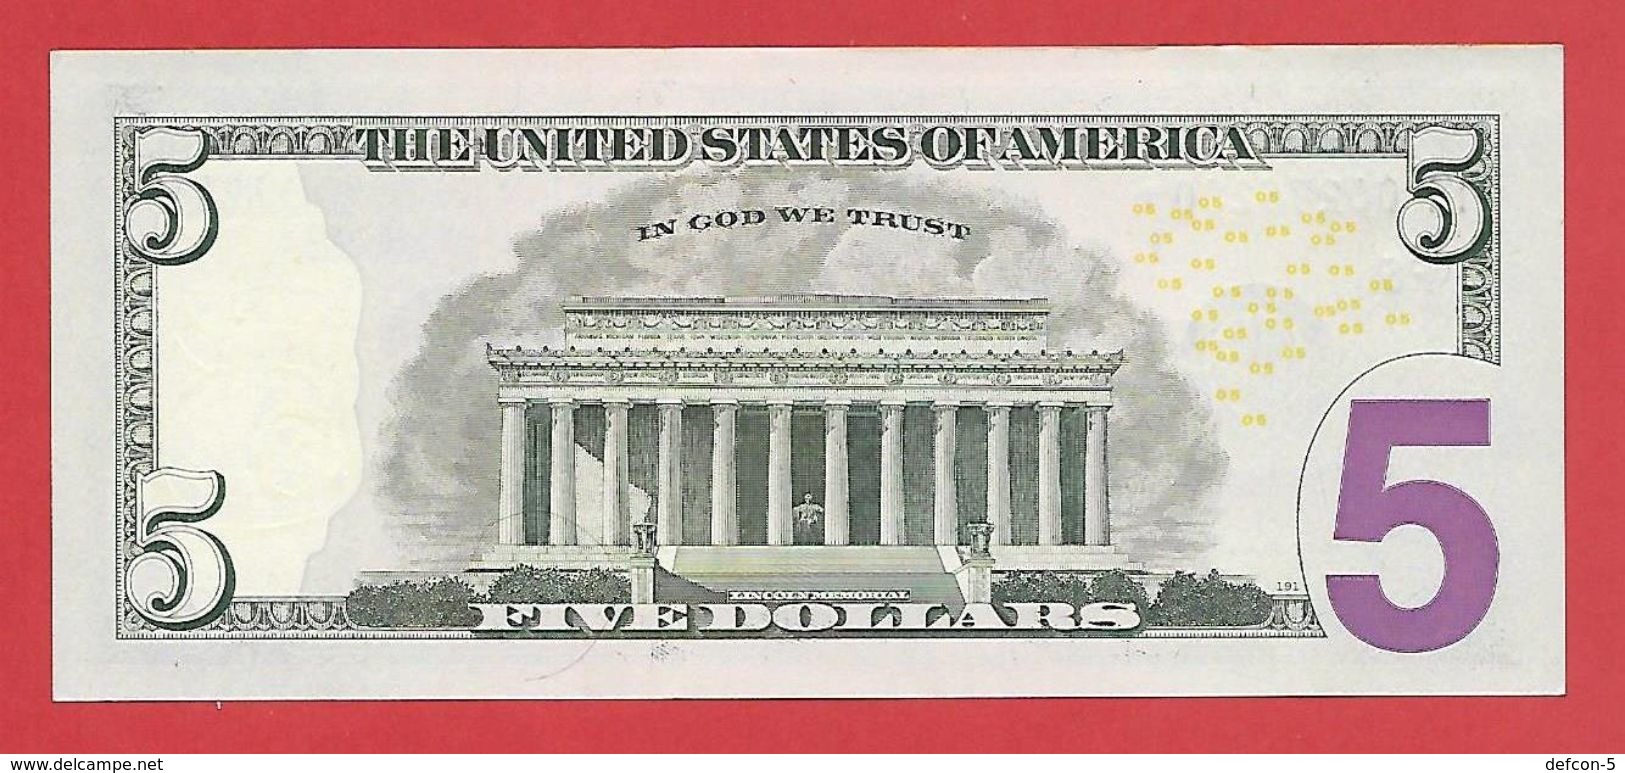 3x STARNOTE ° 5 US-Dollar 2013 ° 3.200.000 Run-Size ° sehr guter Zust. ° MF0276100+200+300* ($004-05) fancy small number